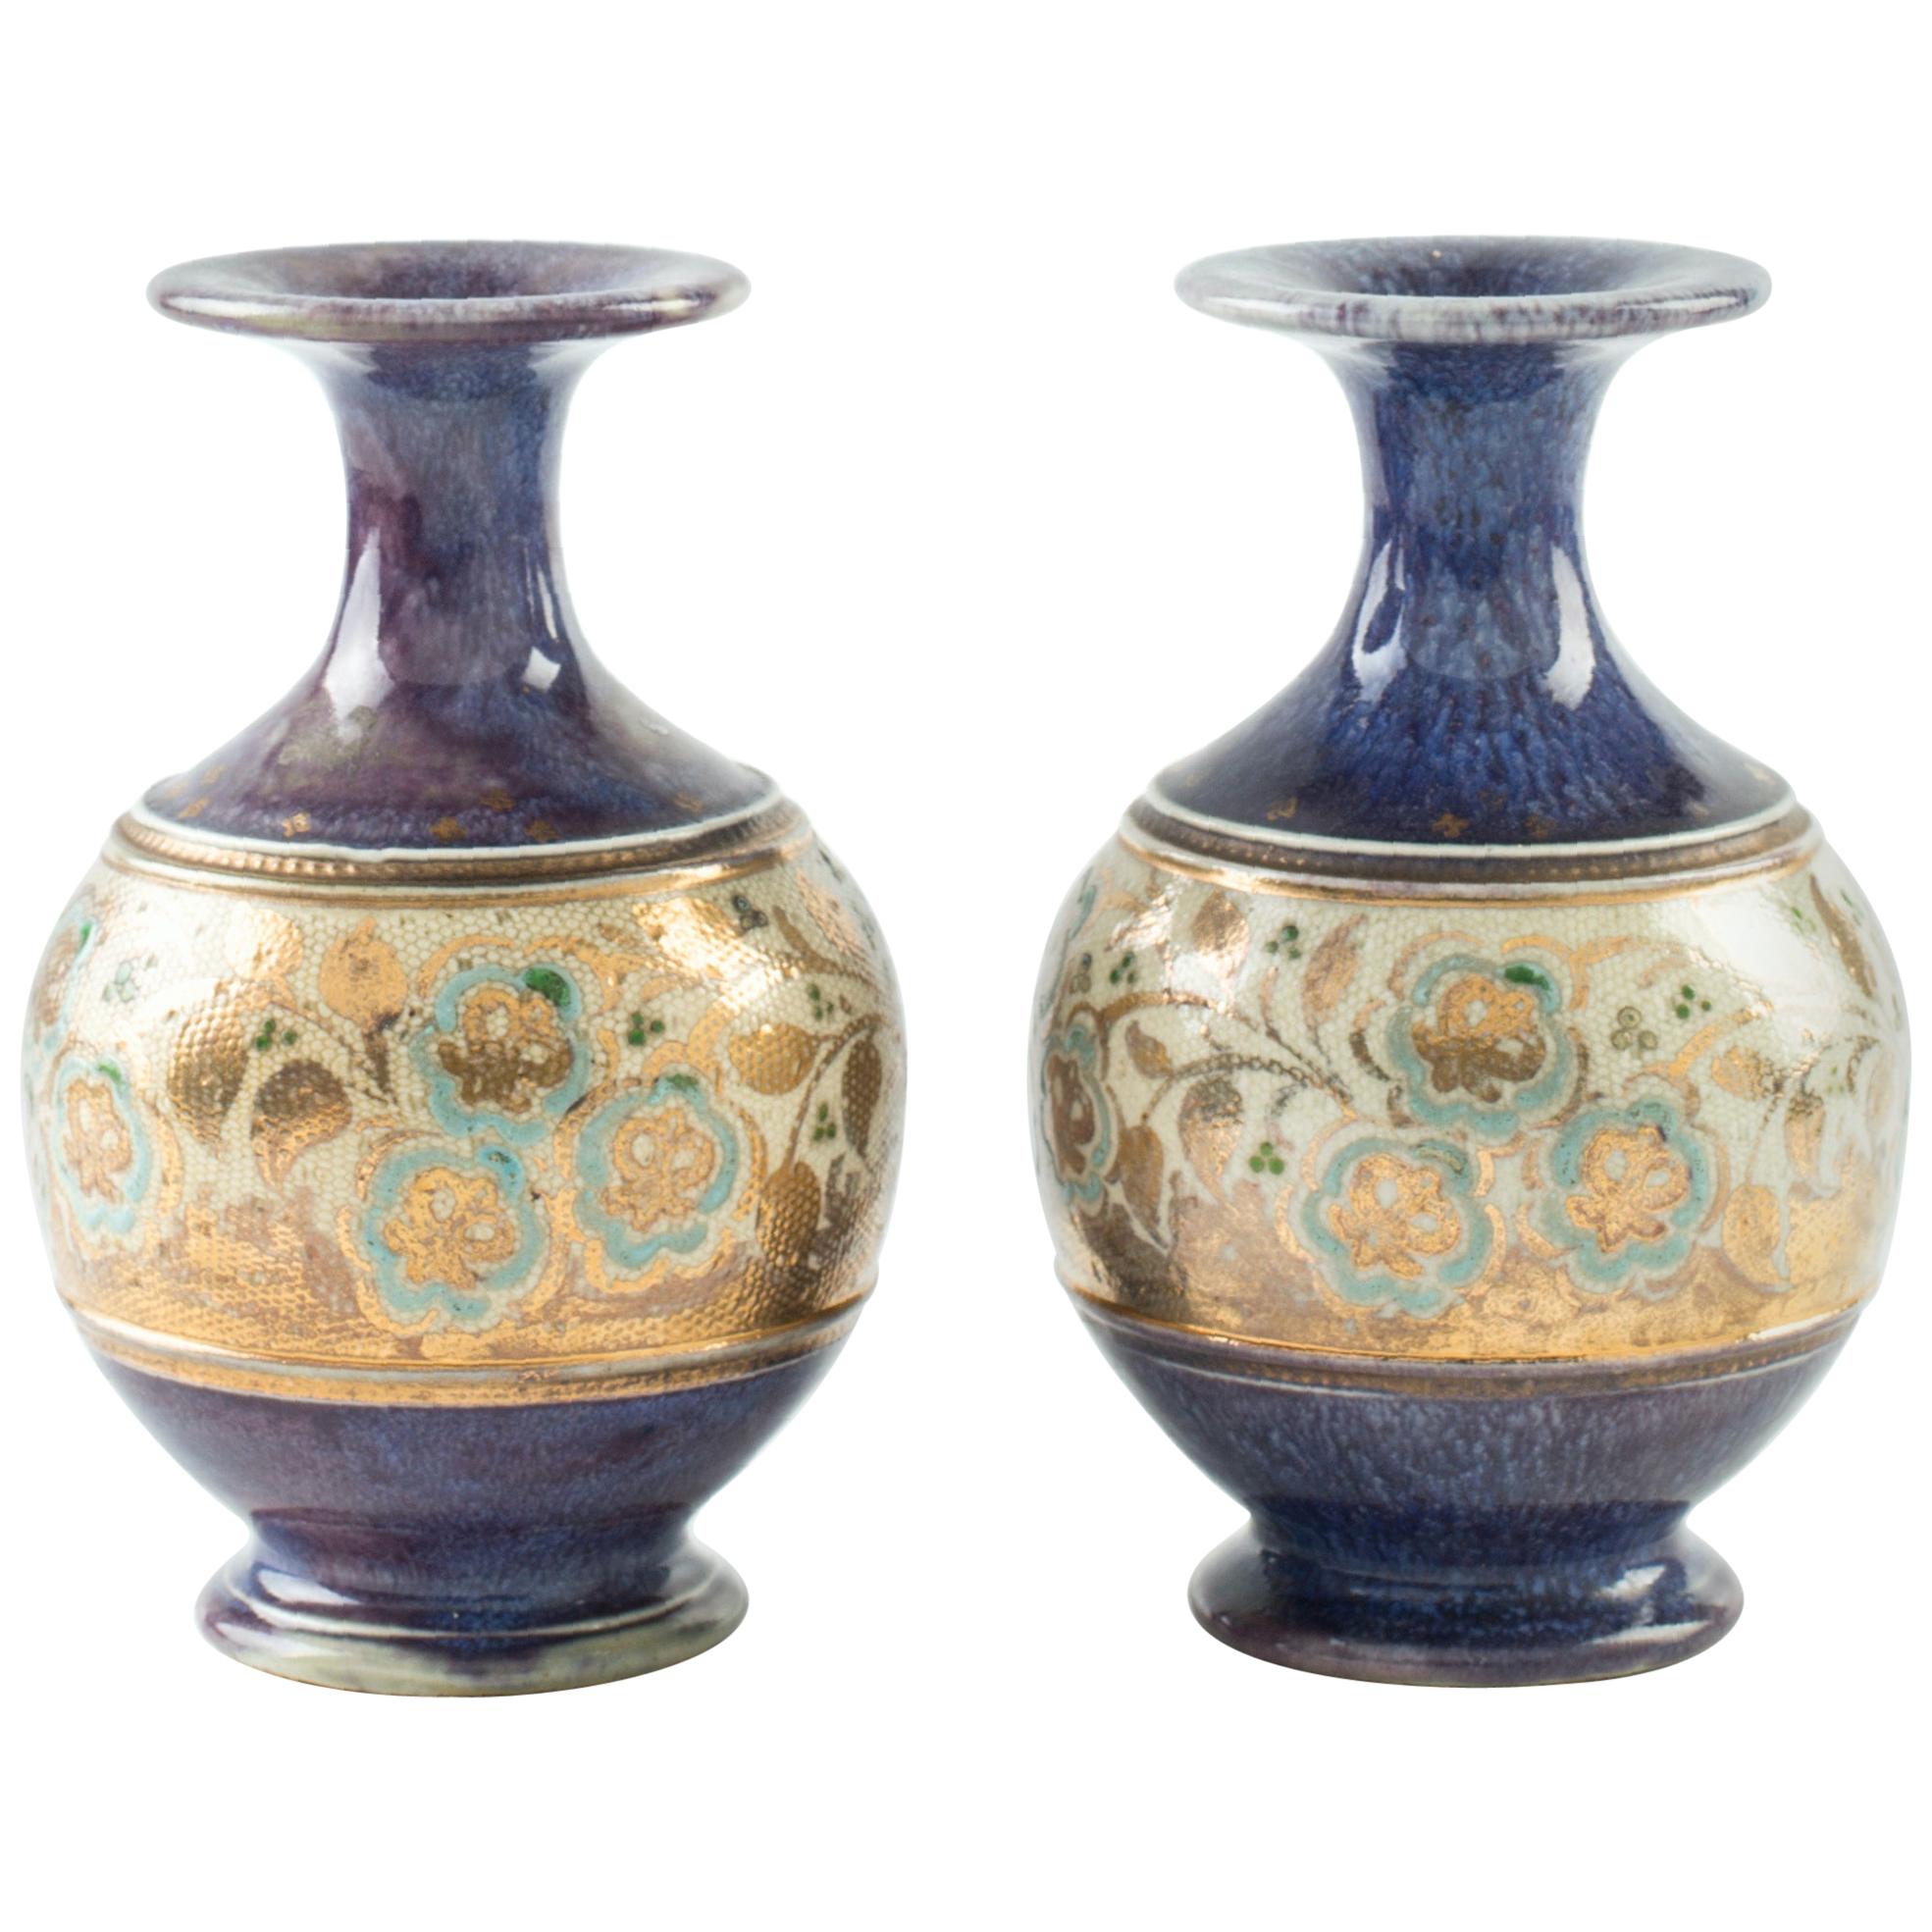 Ancient Pair of Royal Doulton Vases, End of 19th Century